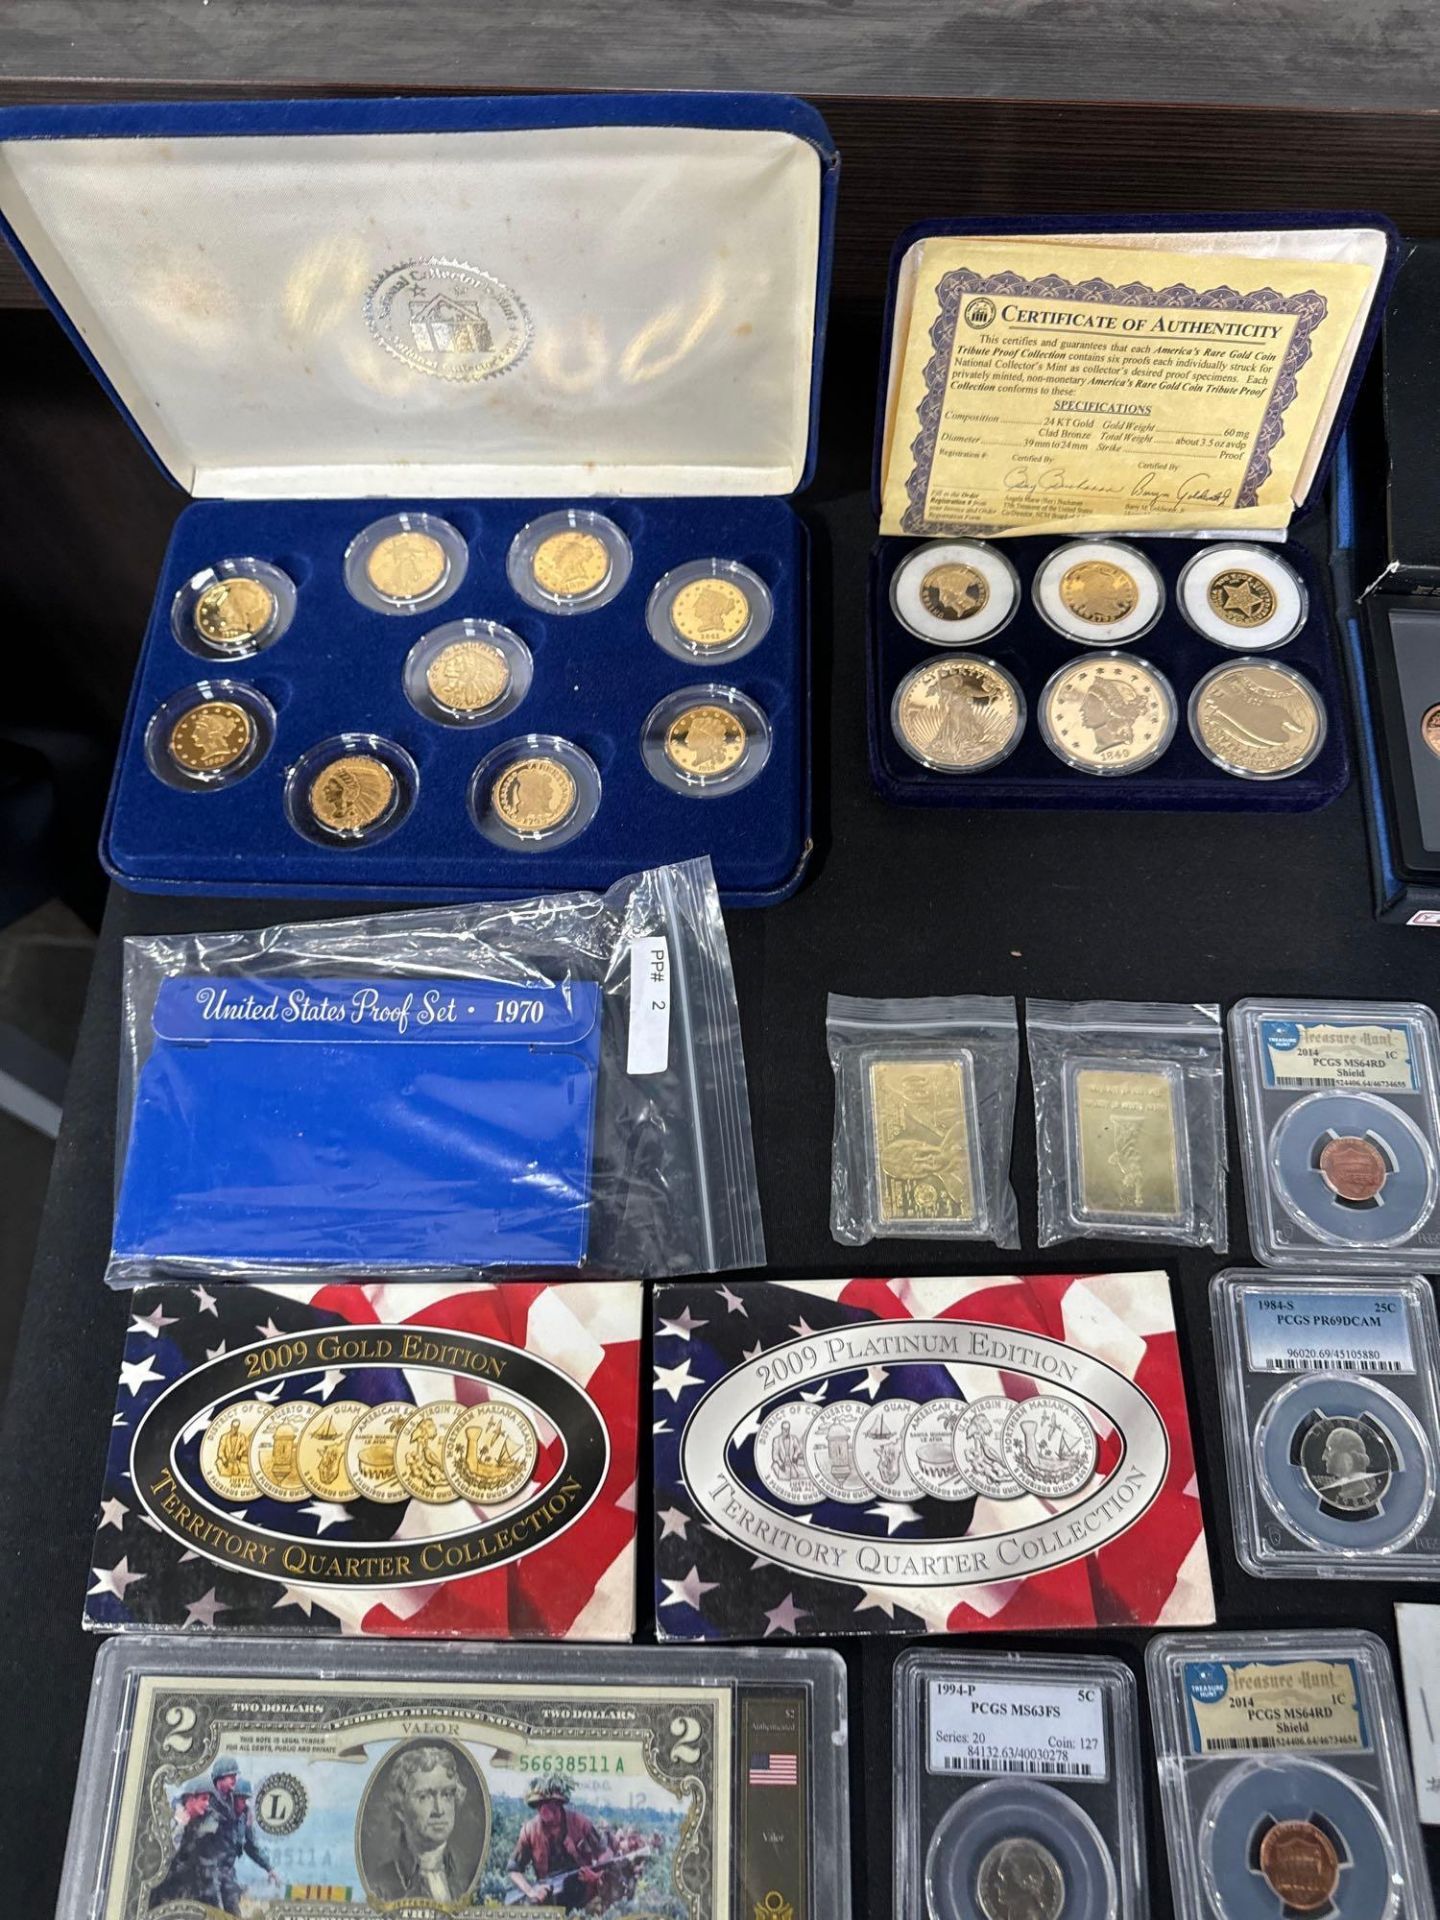 Coin & Currency Lot, Coins in protetors, gold stamps, Quarters, Currecncy, Proof Set, Tribute Proof - Image 3 of 7